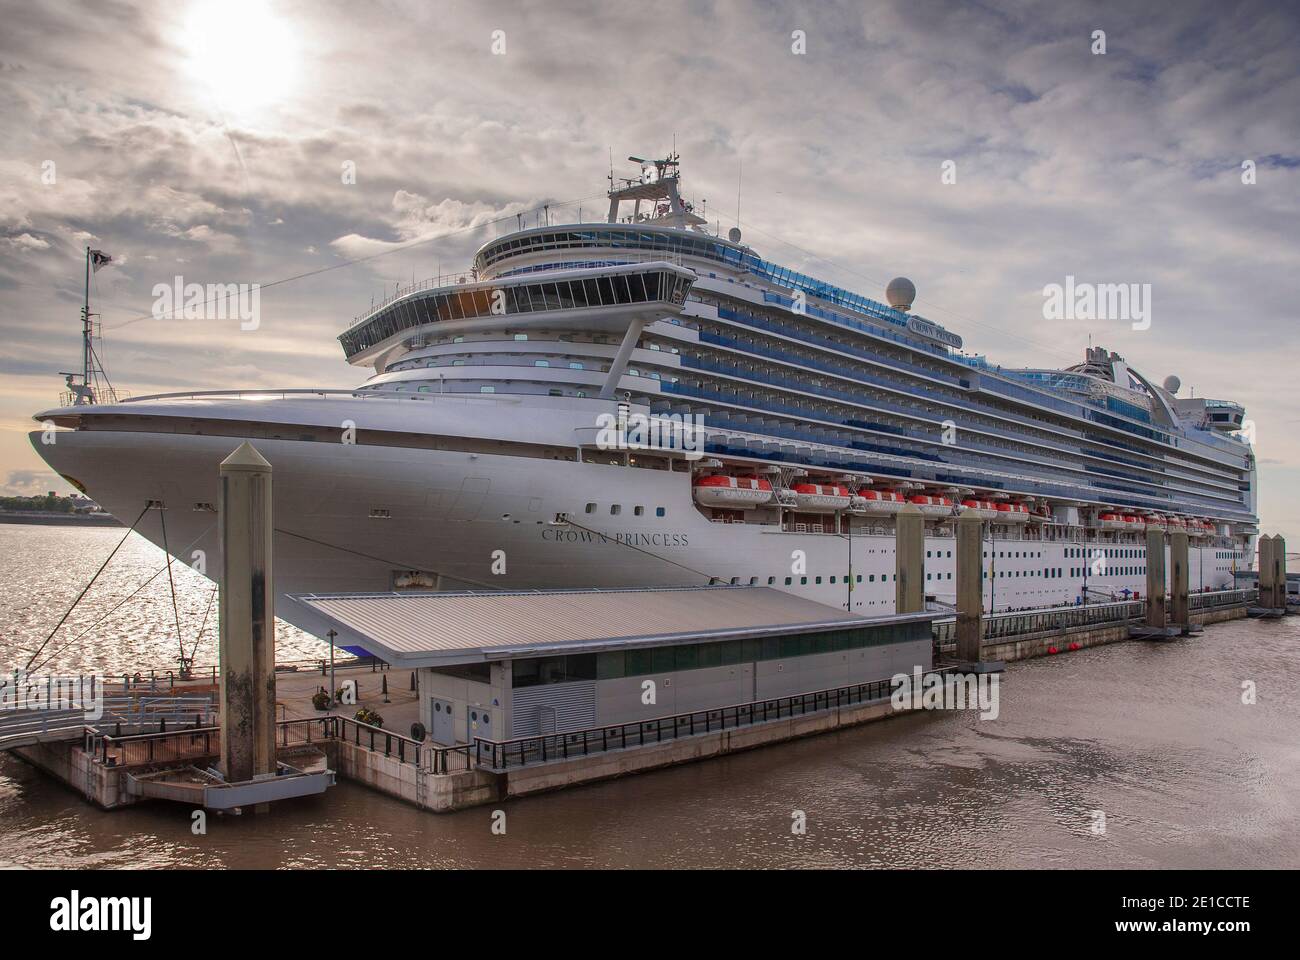 The cruise ship Crown Princess. In happier times at Liverpool Cruise terminal landing stage. Stock Photo